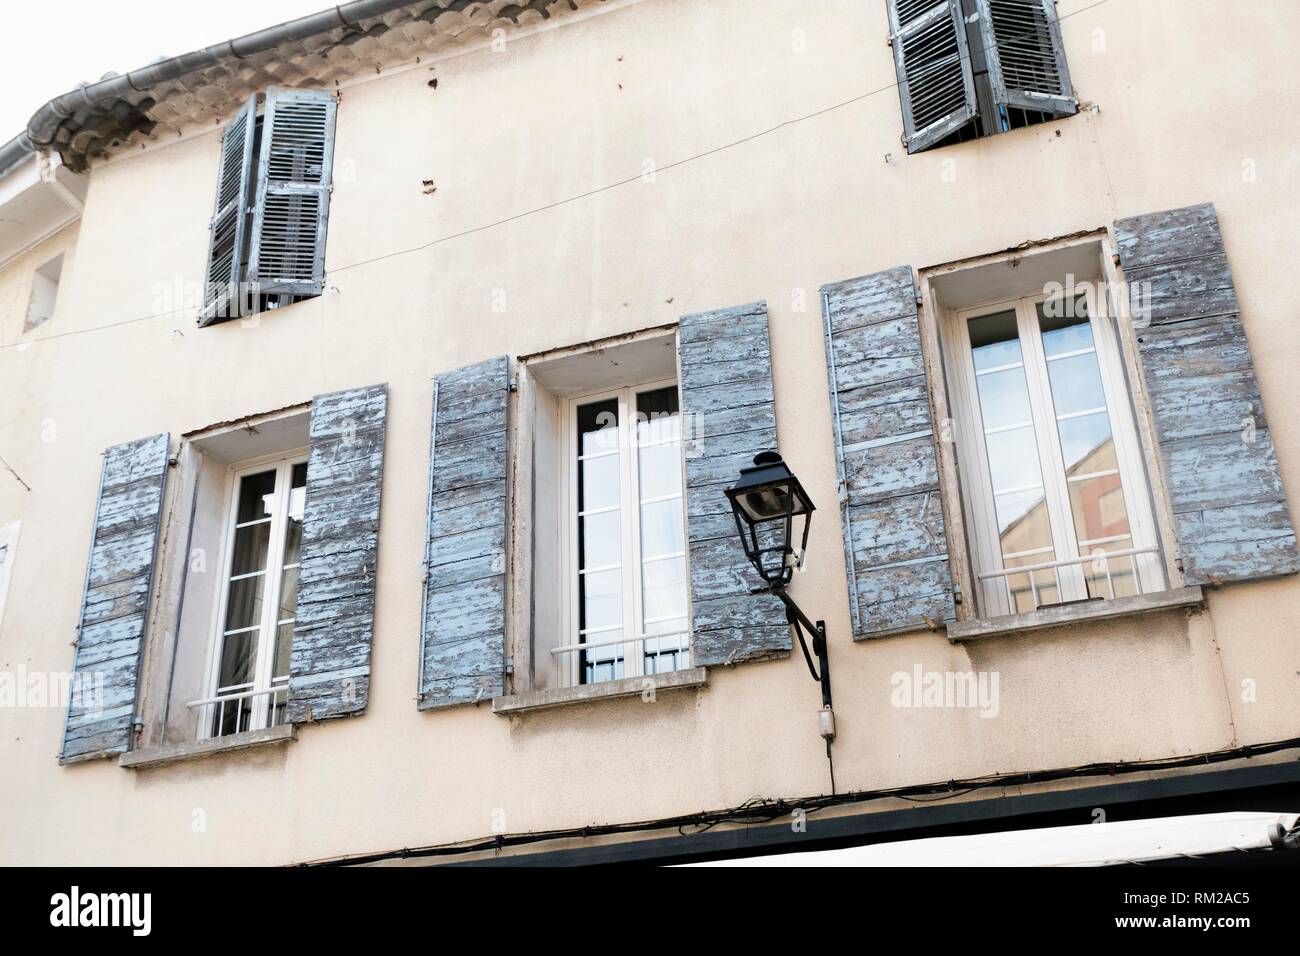 Sun weathered, pale blue rustic shutters on a traditional Provencal house with carriage lamp in L'Isle-sur-la-Sorgue, Provence, France. Stock Photo